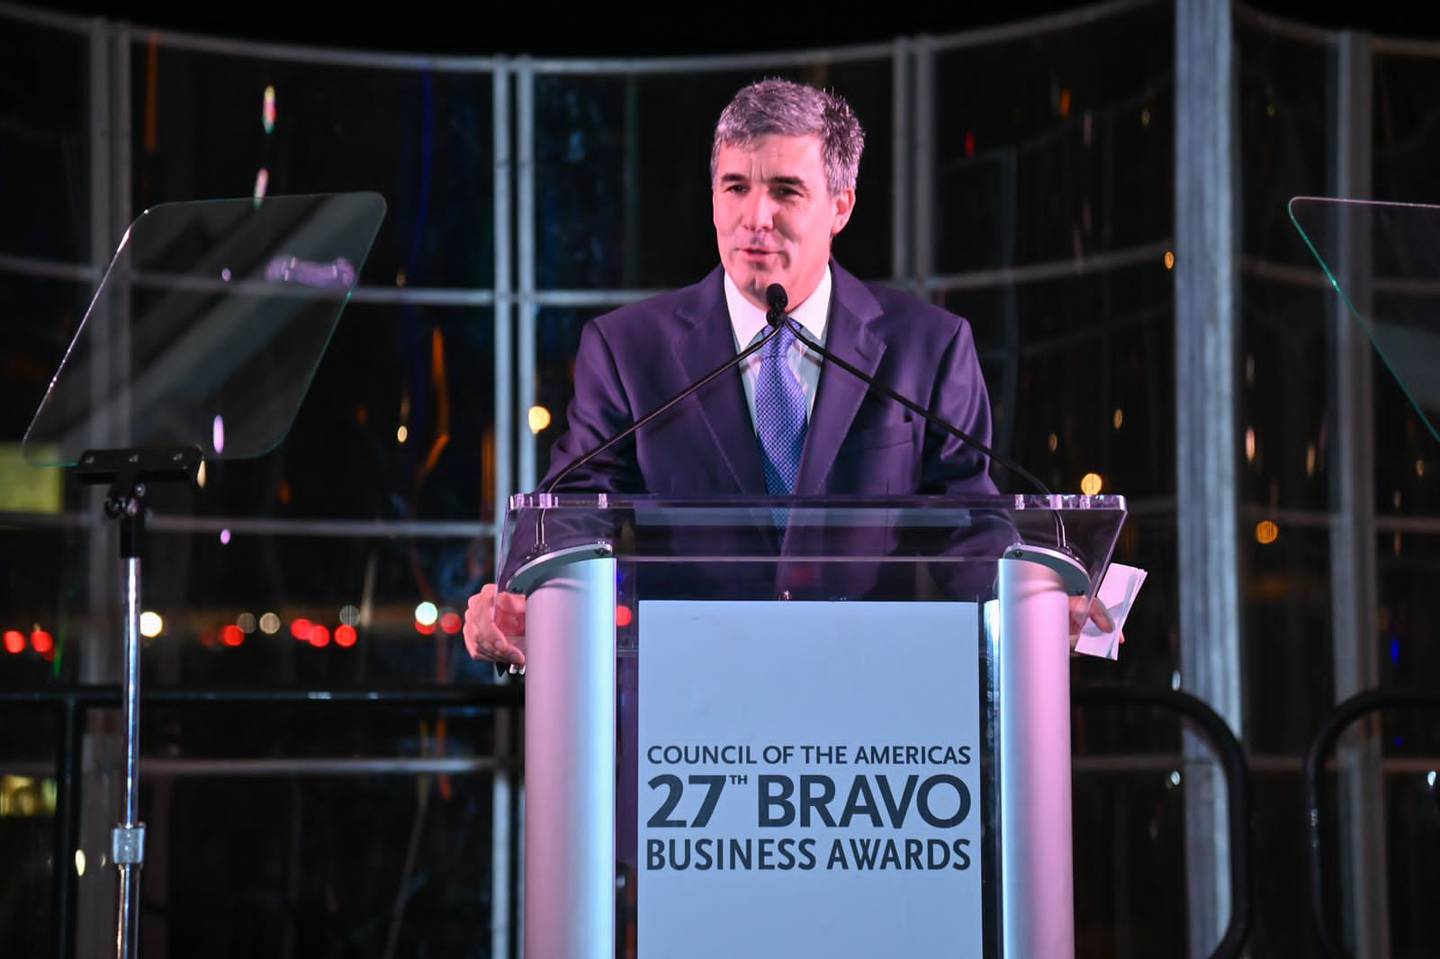 Gaston Bottazzini, CEO of Falabella, after receiving the BRAVO award at the Council of the Americas summit in Miami. Photo: Falabelladfd